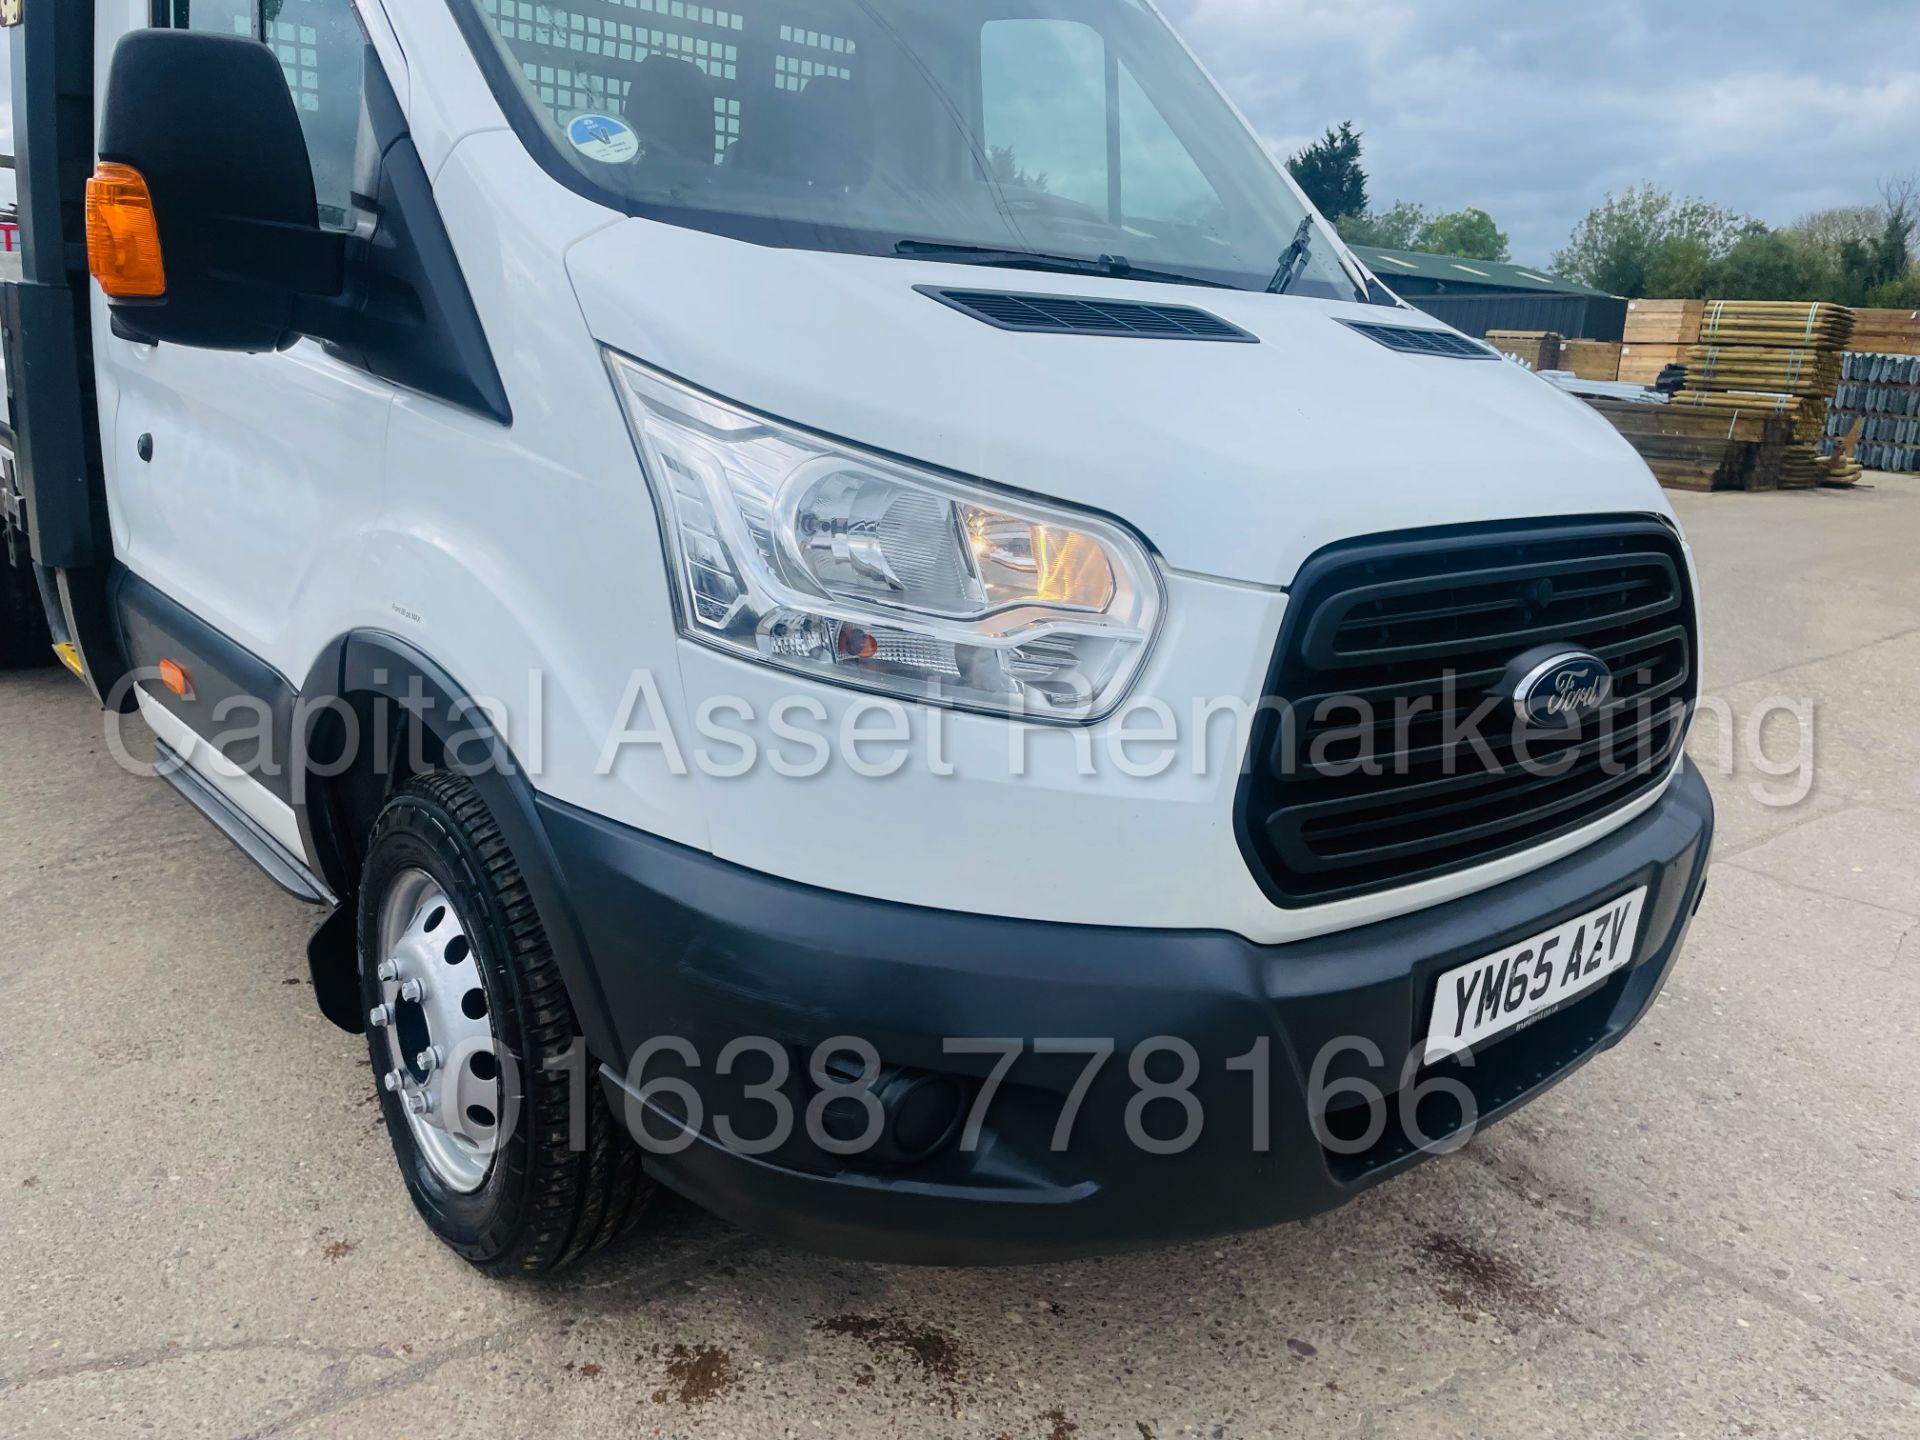 (On Sale) FORD TRANSIT 100 T350 *LWB - DROPSIDE TRUCK* (2016 - NEW MODEL) '2.2 TDCI - 6 SPEED' - Image 15 of 37